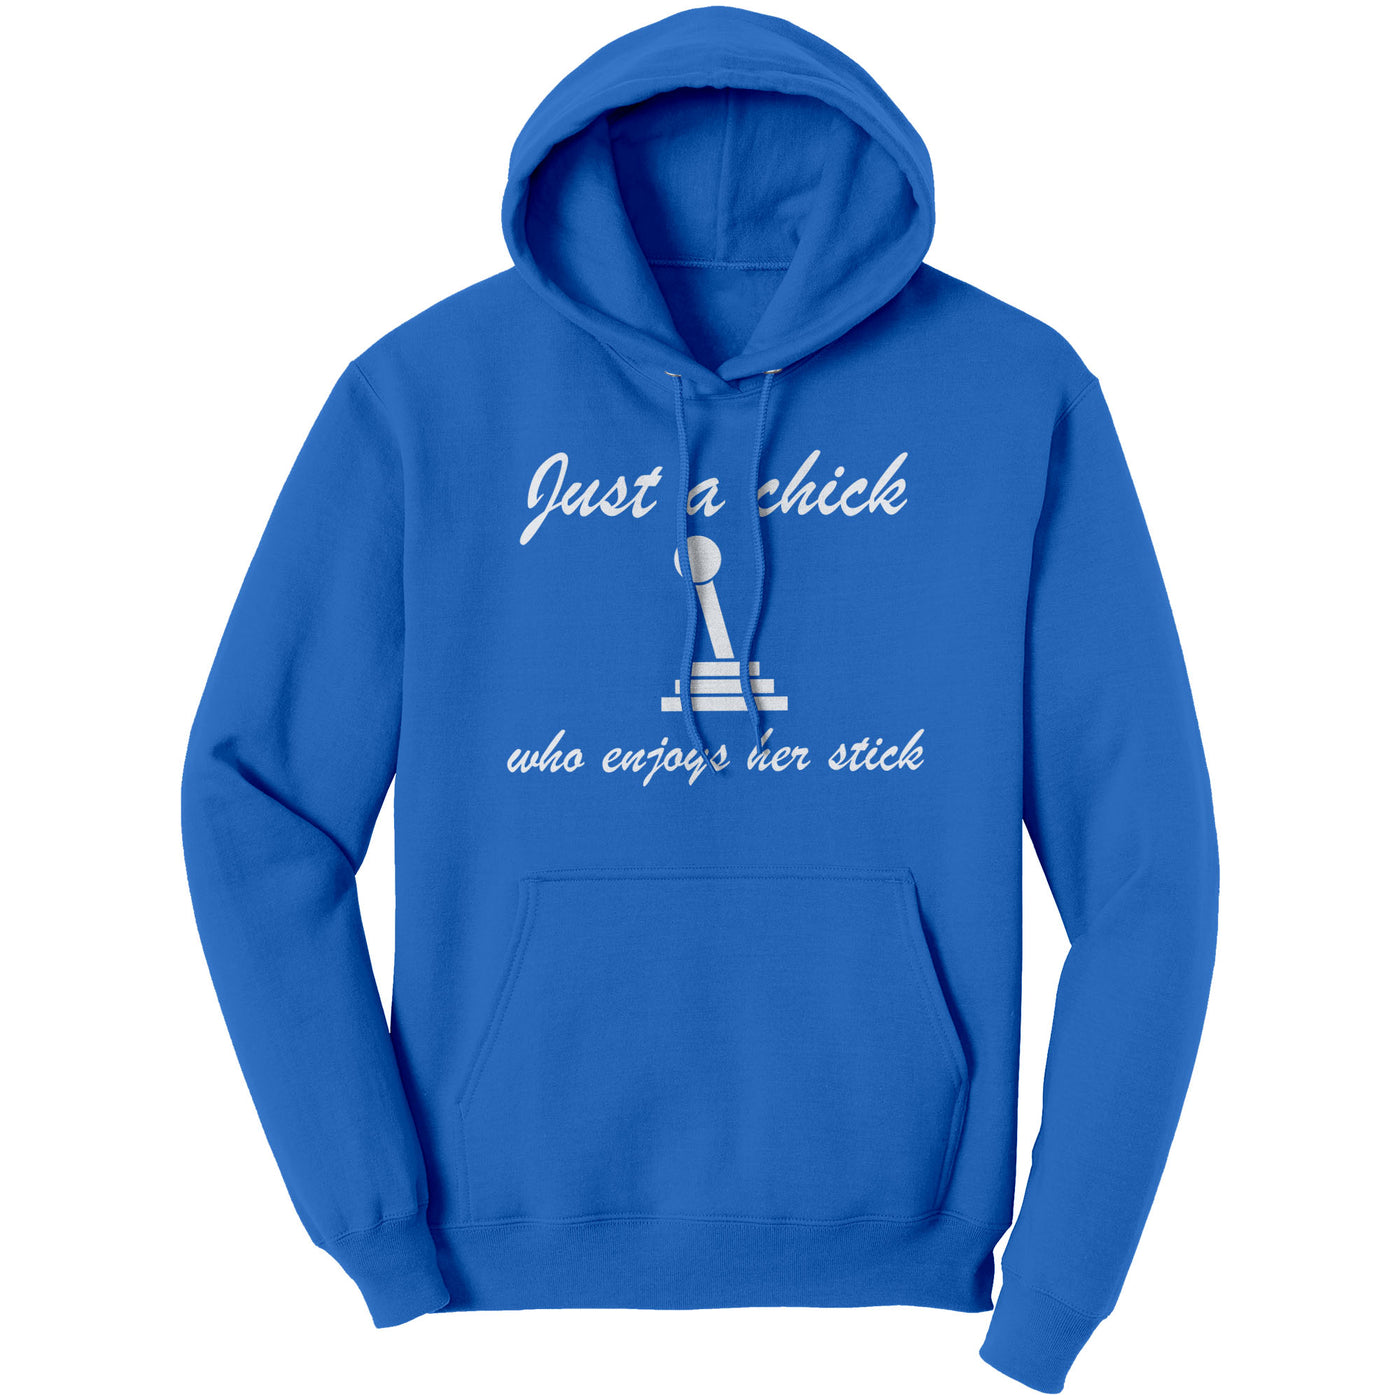 just-a-chick-who-enjoys-her-stick-hoodie-blue